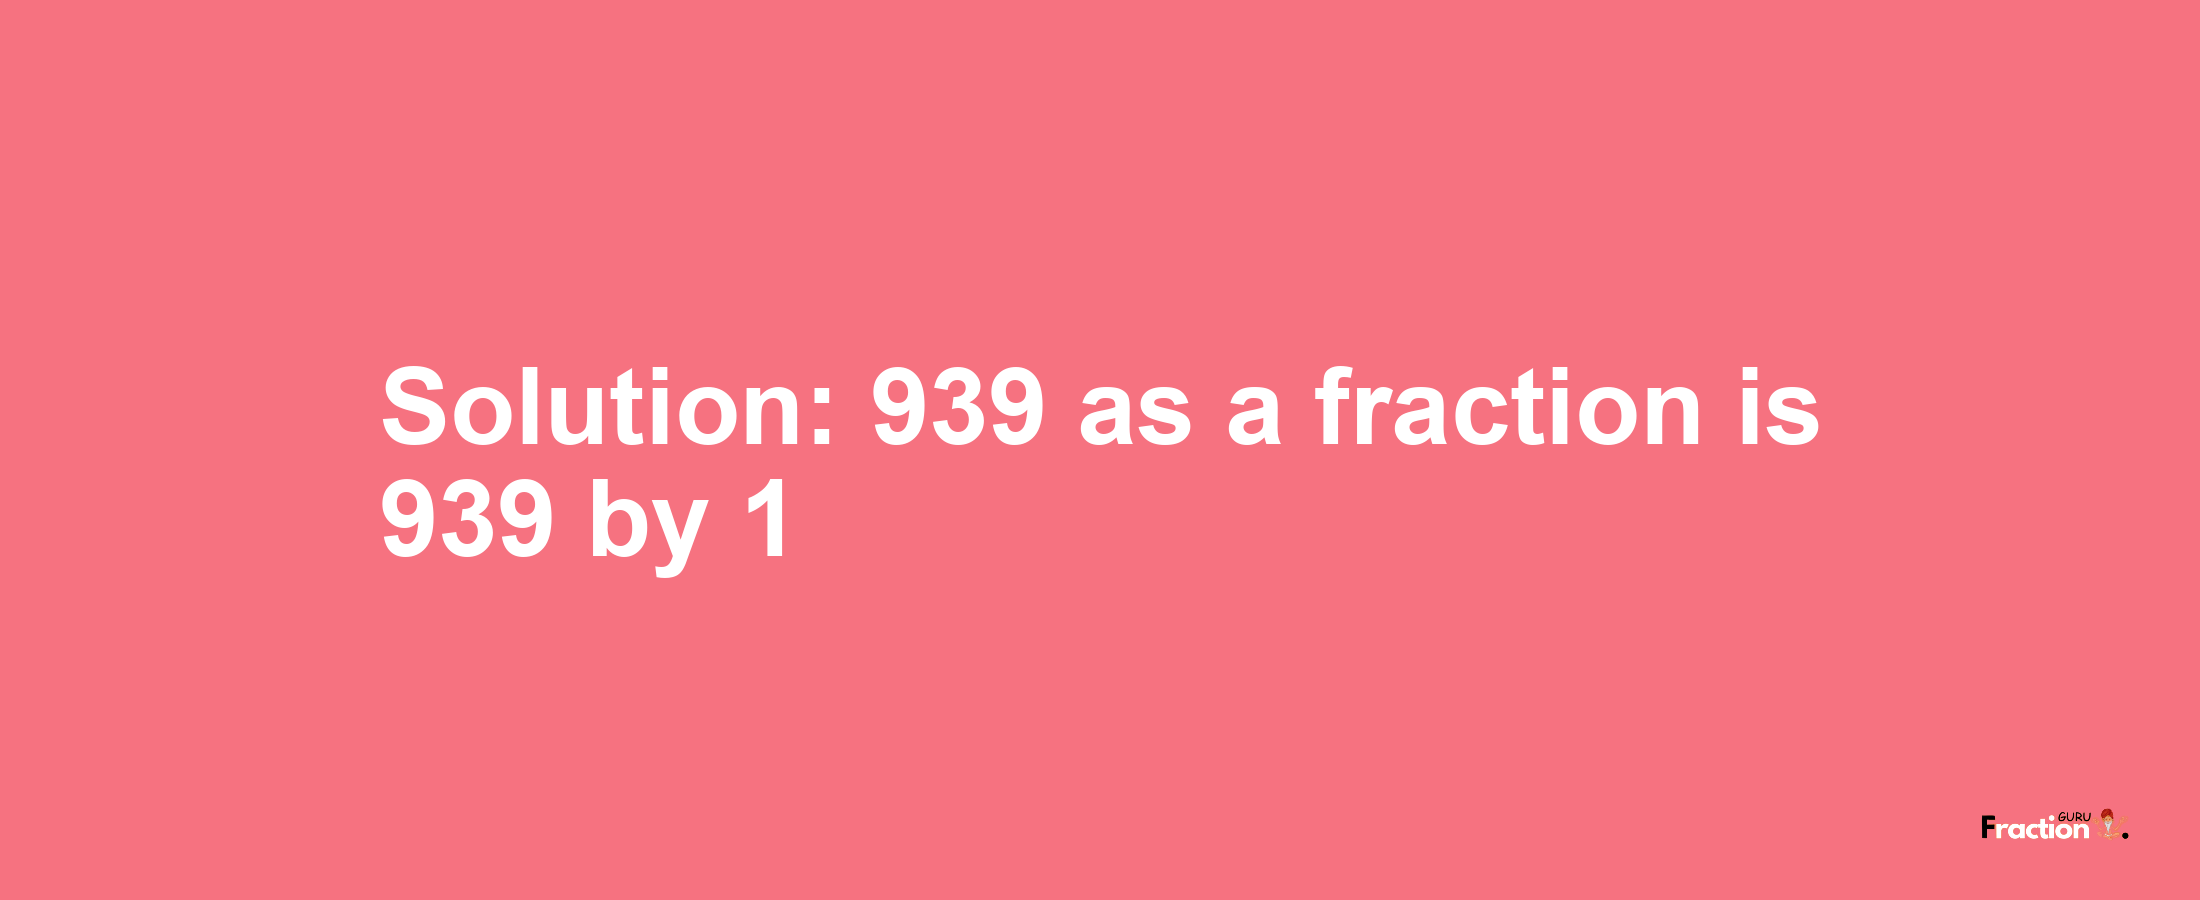 Solution:939 as a fraction is 939/1